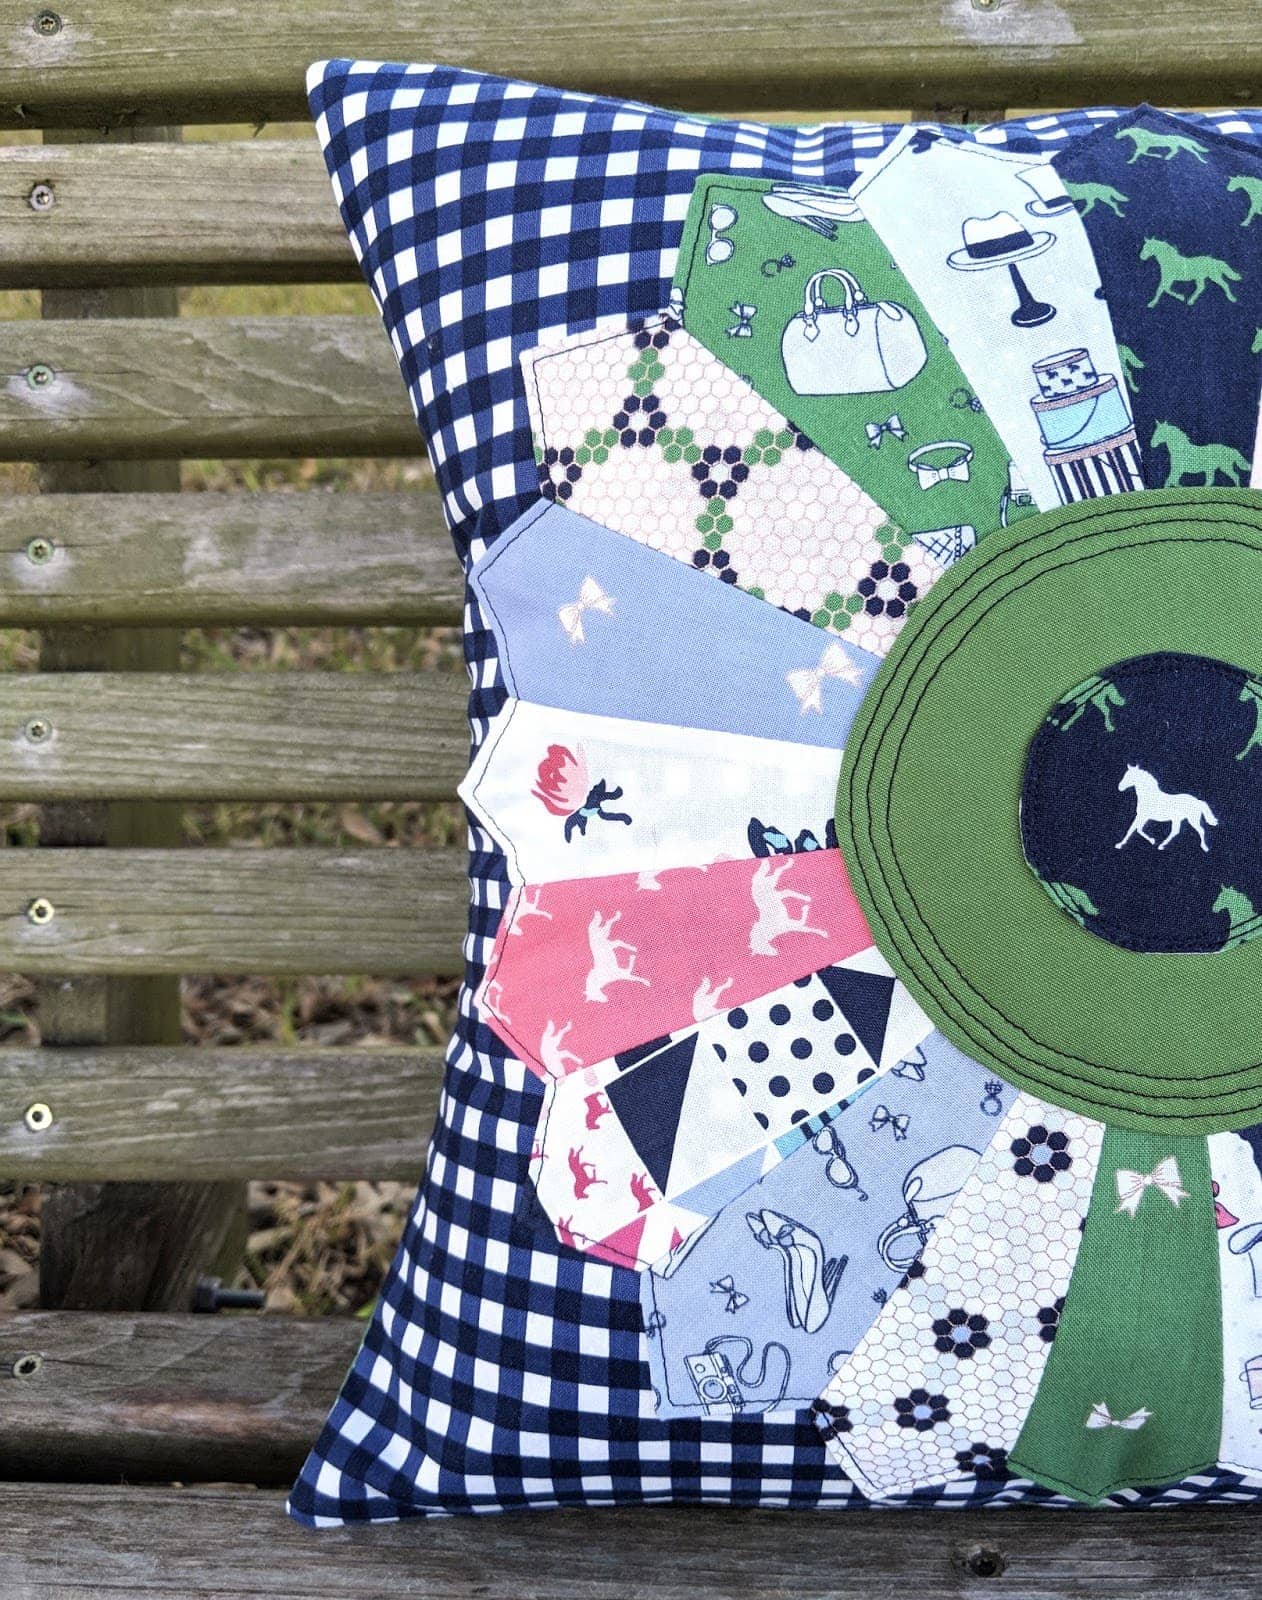 Dresden Pillow by Heidi Staples using Derby Day Fabric